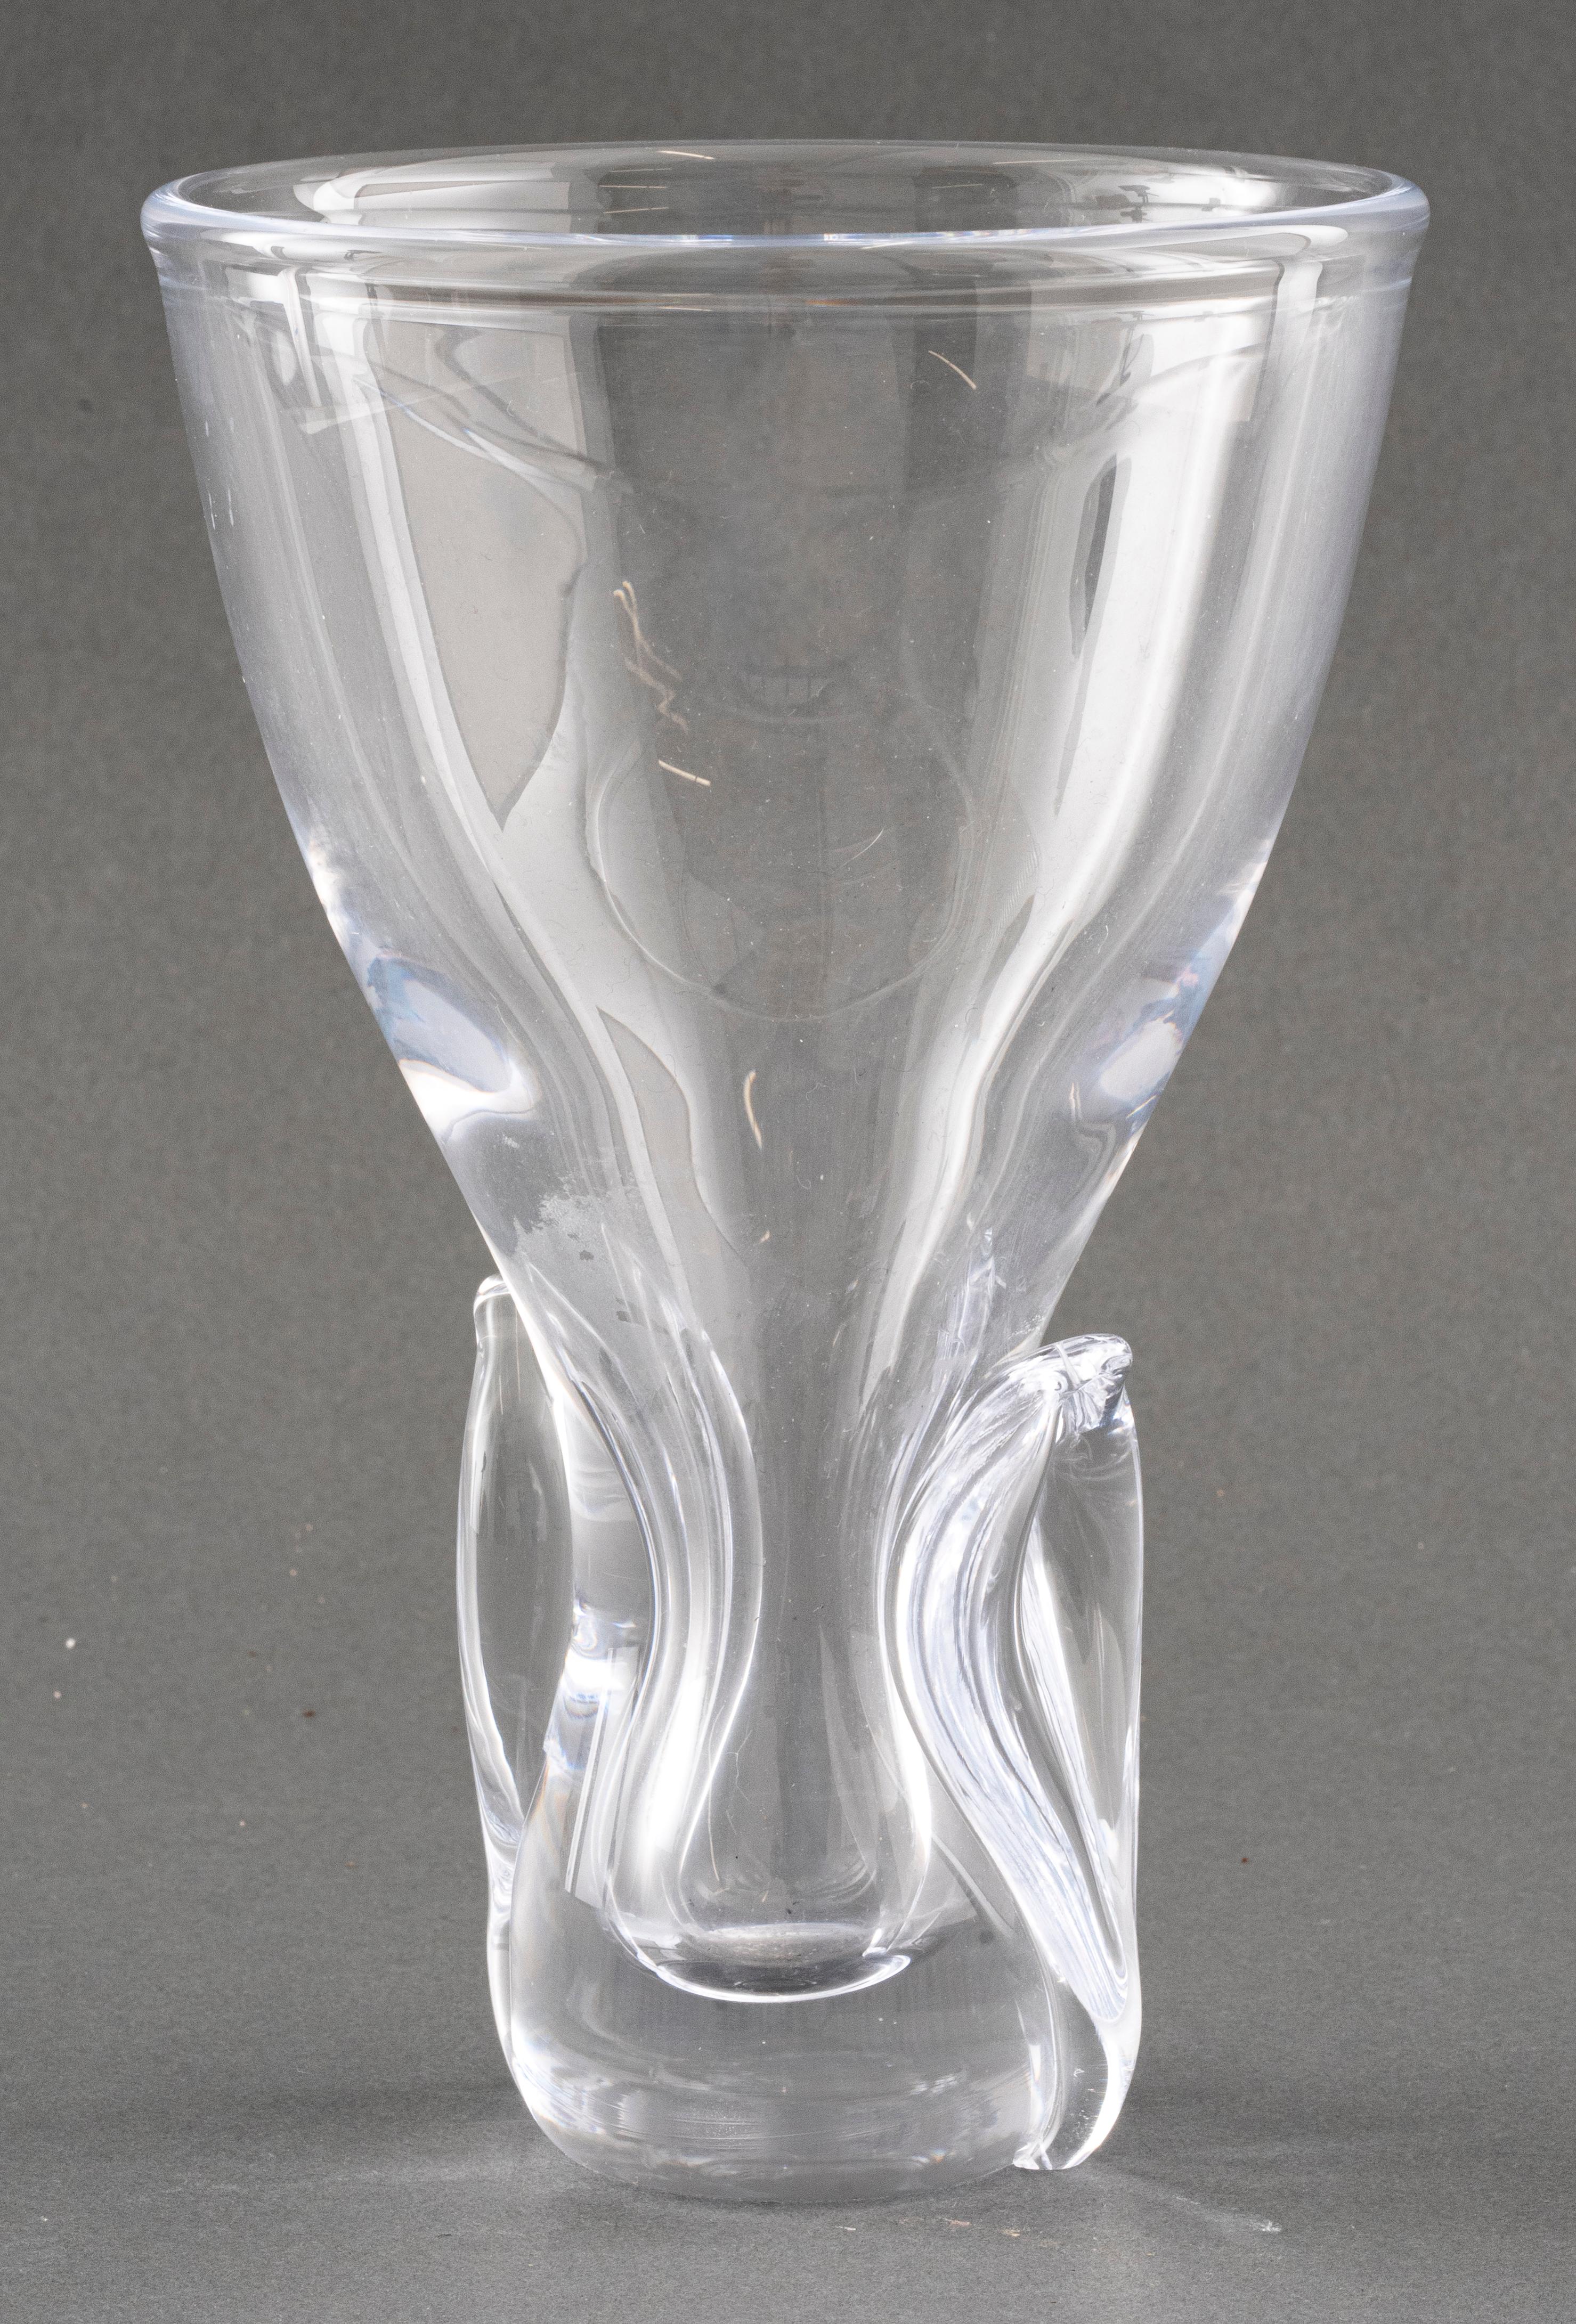 Steuben crystal glass, marked 